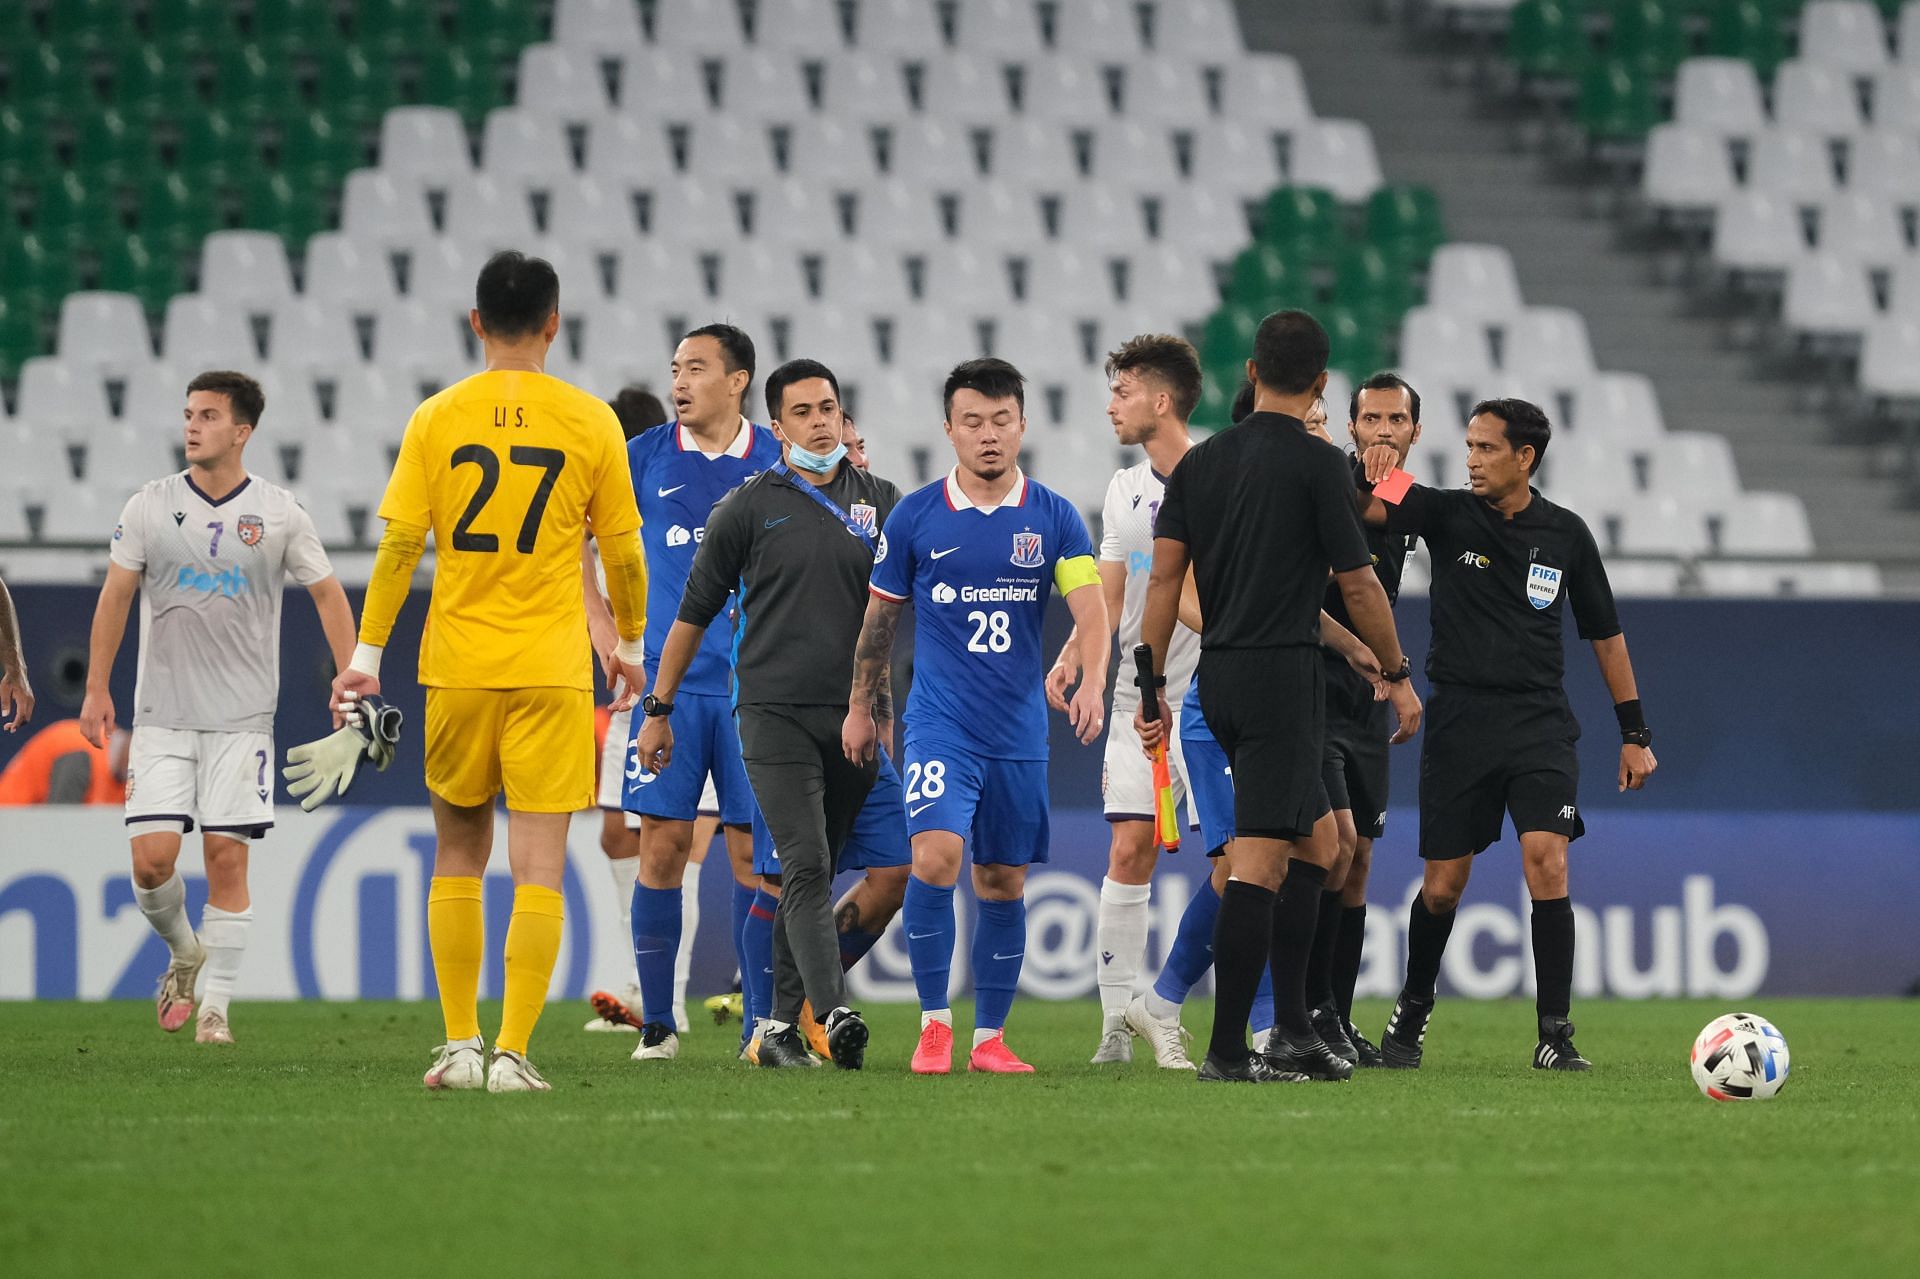 Shanghai Shenhua will face Wuhan on Tuesday - Chinese Super League